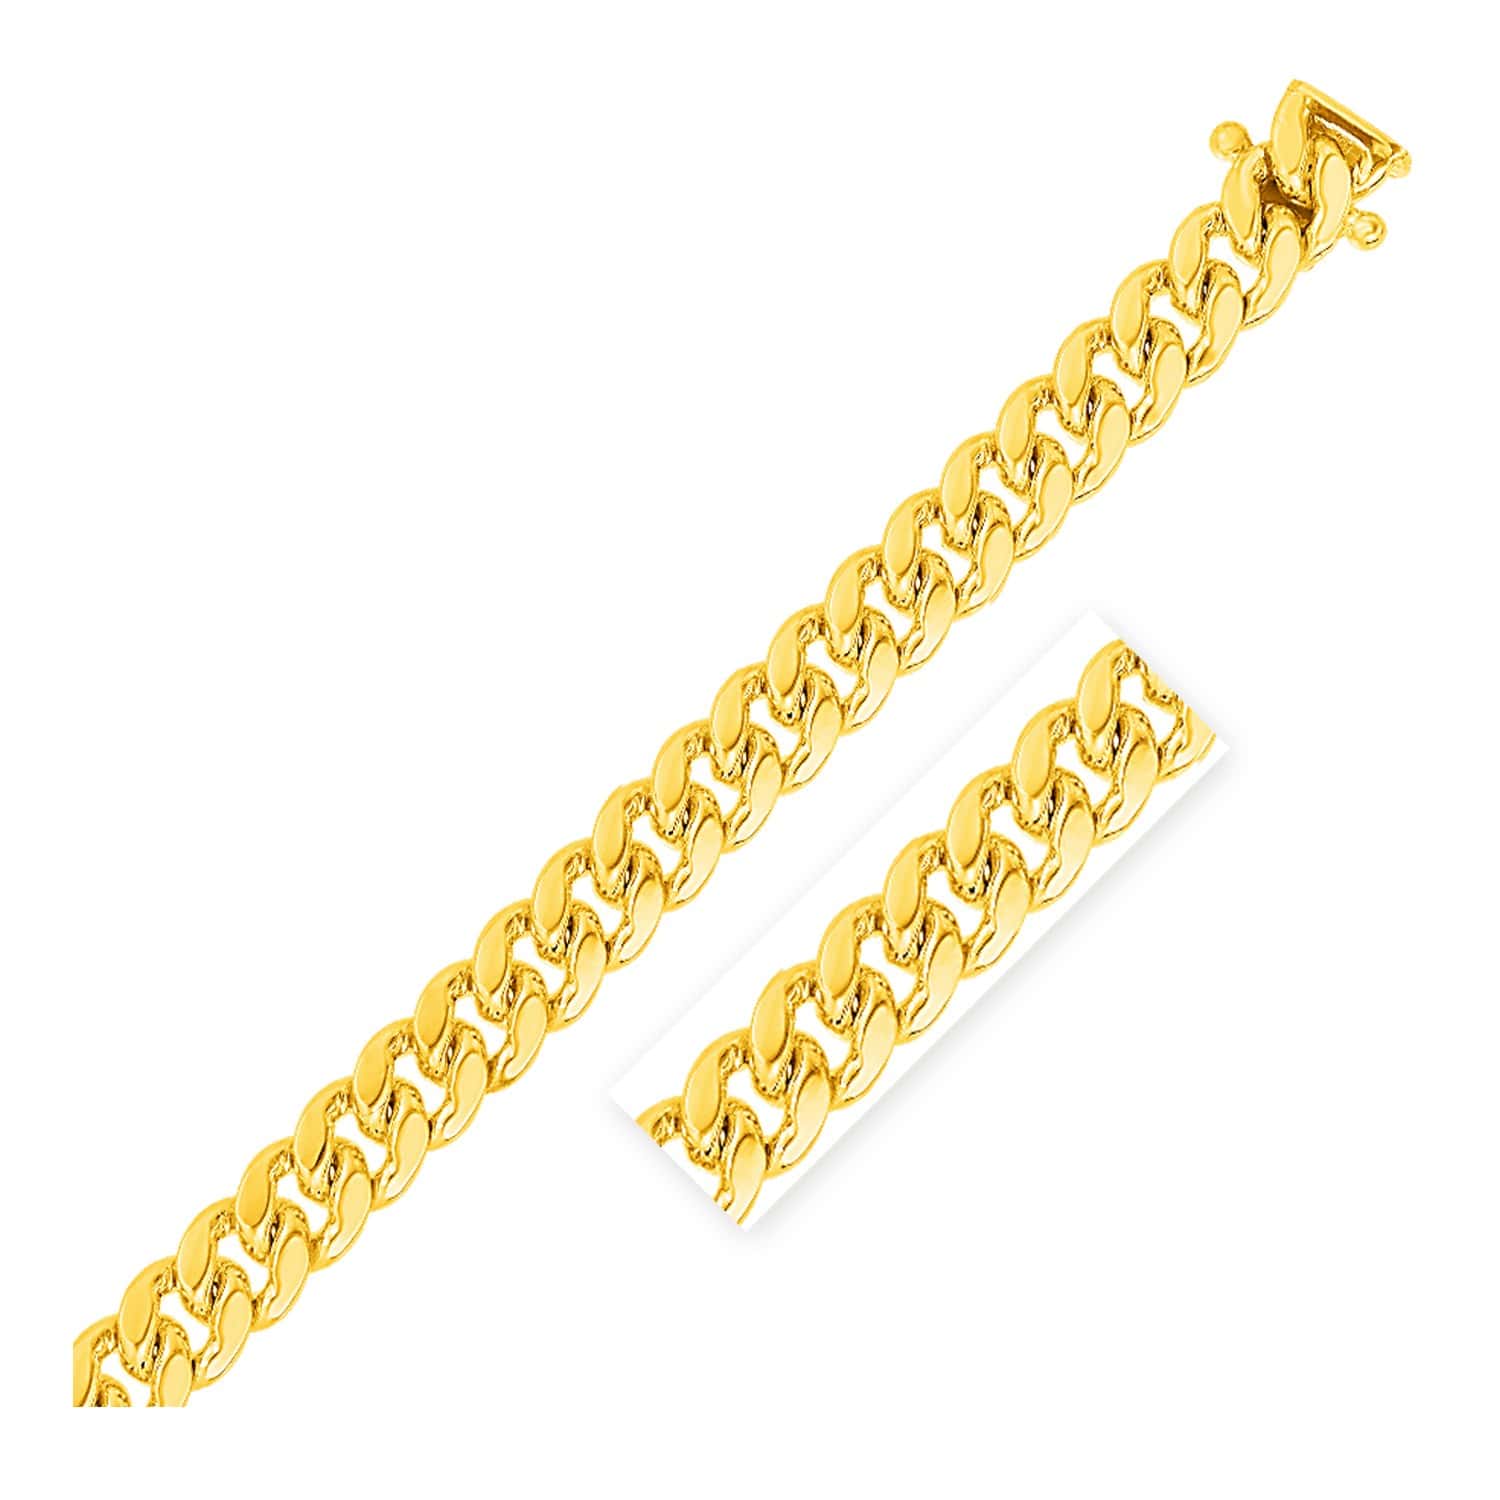 10.0mm 14k Yellow Gold Classic Miami Cuban Solid Chain